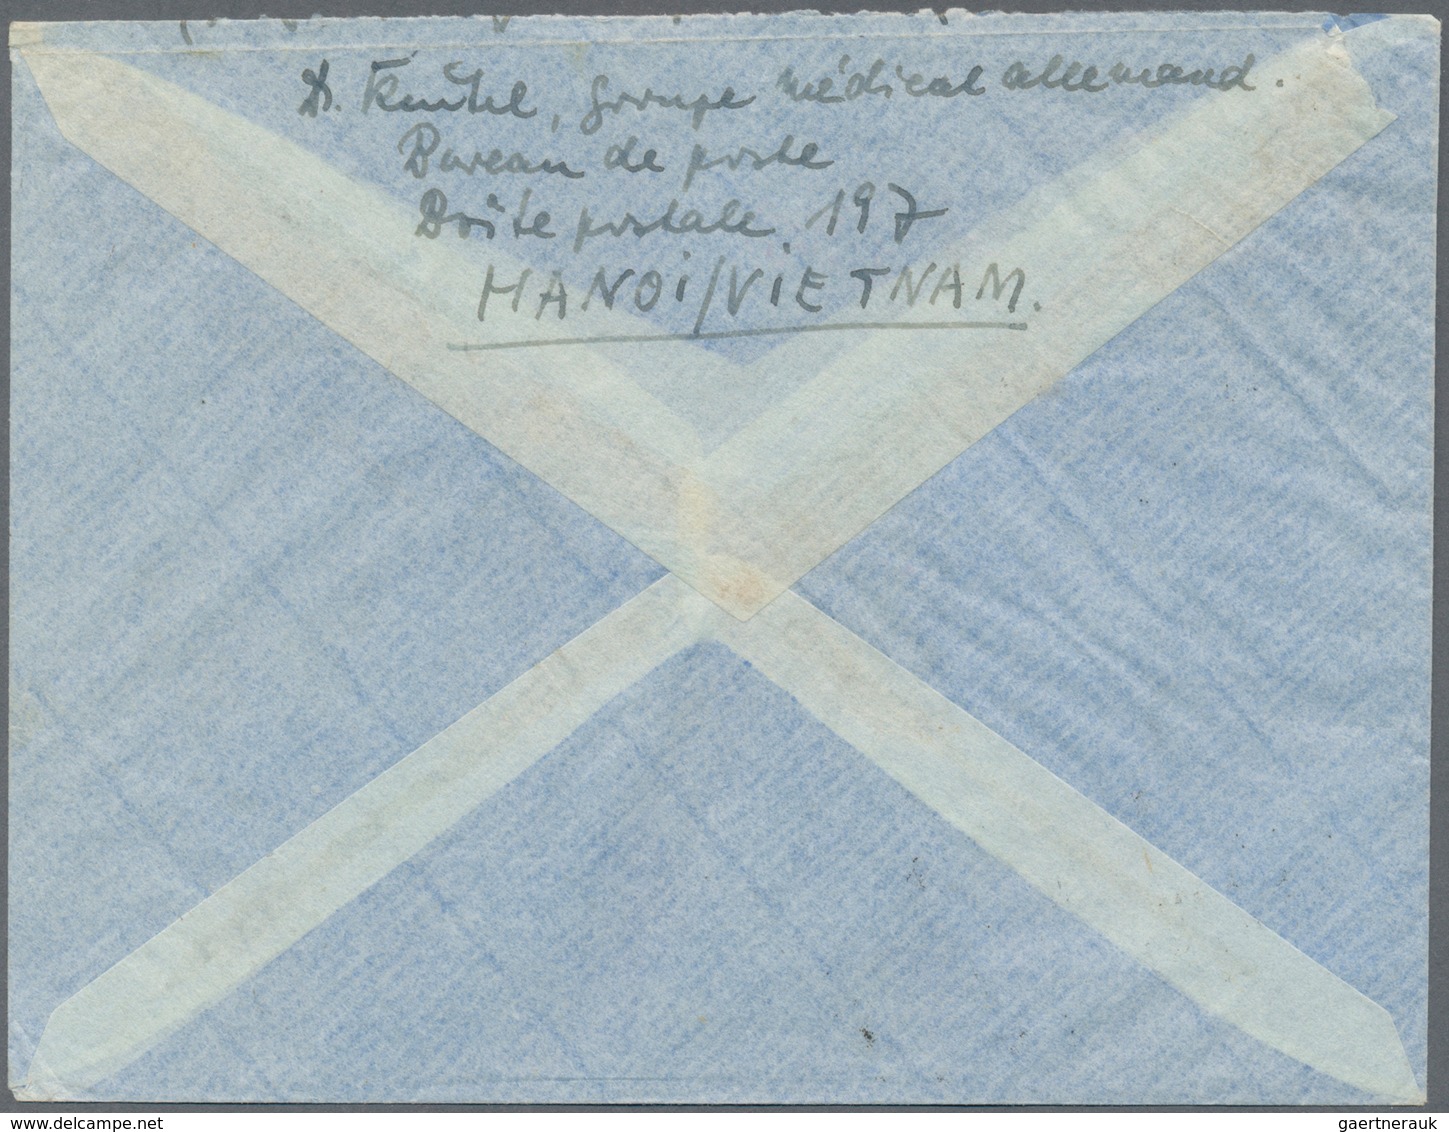 Vietnam-Nord (1945-1975): 1956, Airmail Cover Addressed To Dresden, East Germany, Bearing Re-opening - Vietnam